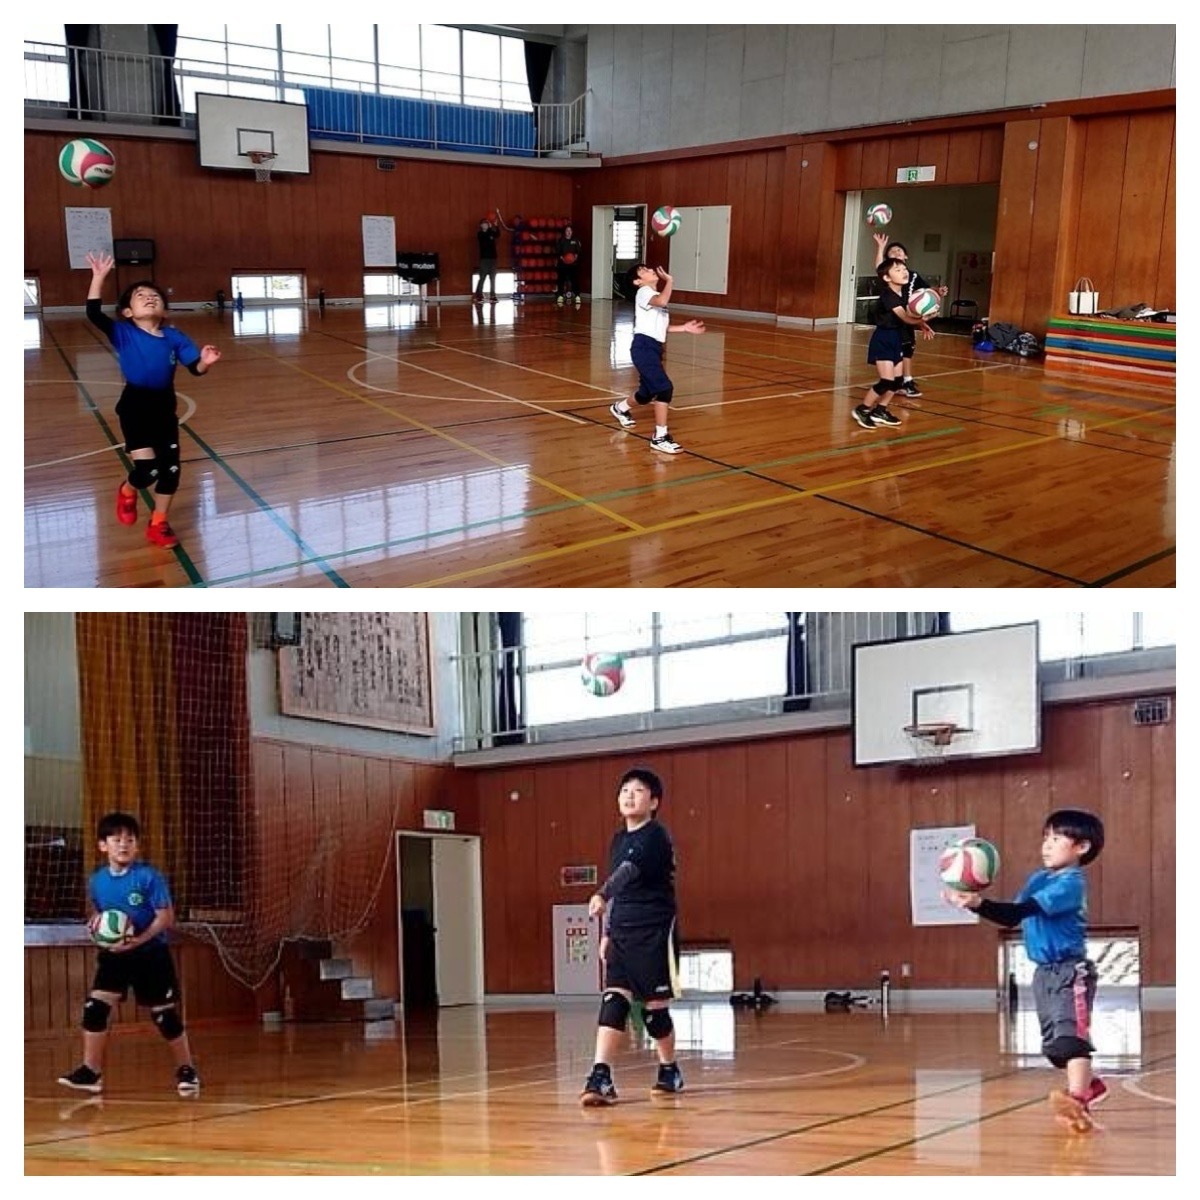 T Five Cup Ask Boys アスクボーイズ 心をひとつに 横浜市男子小学生バレーボールチーム